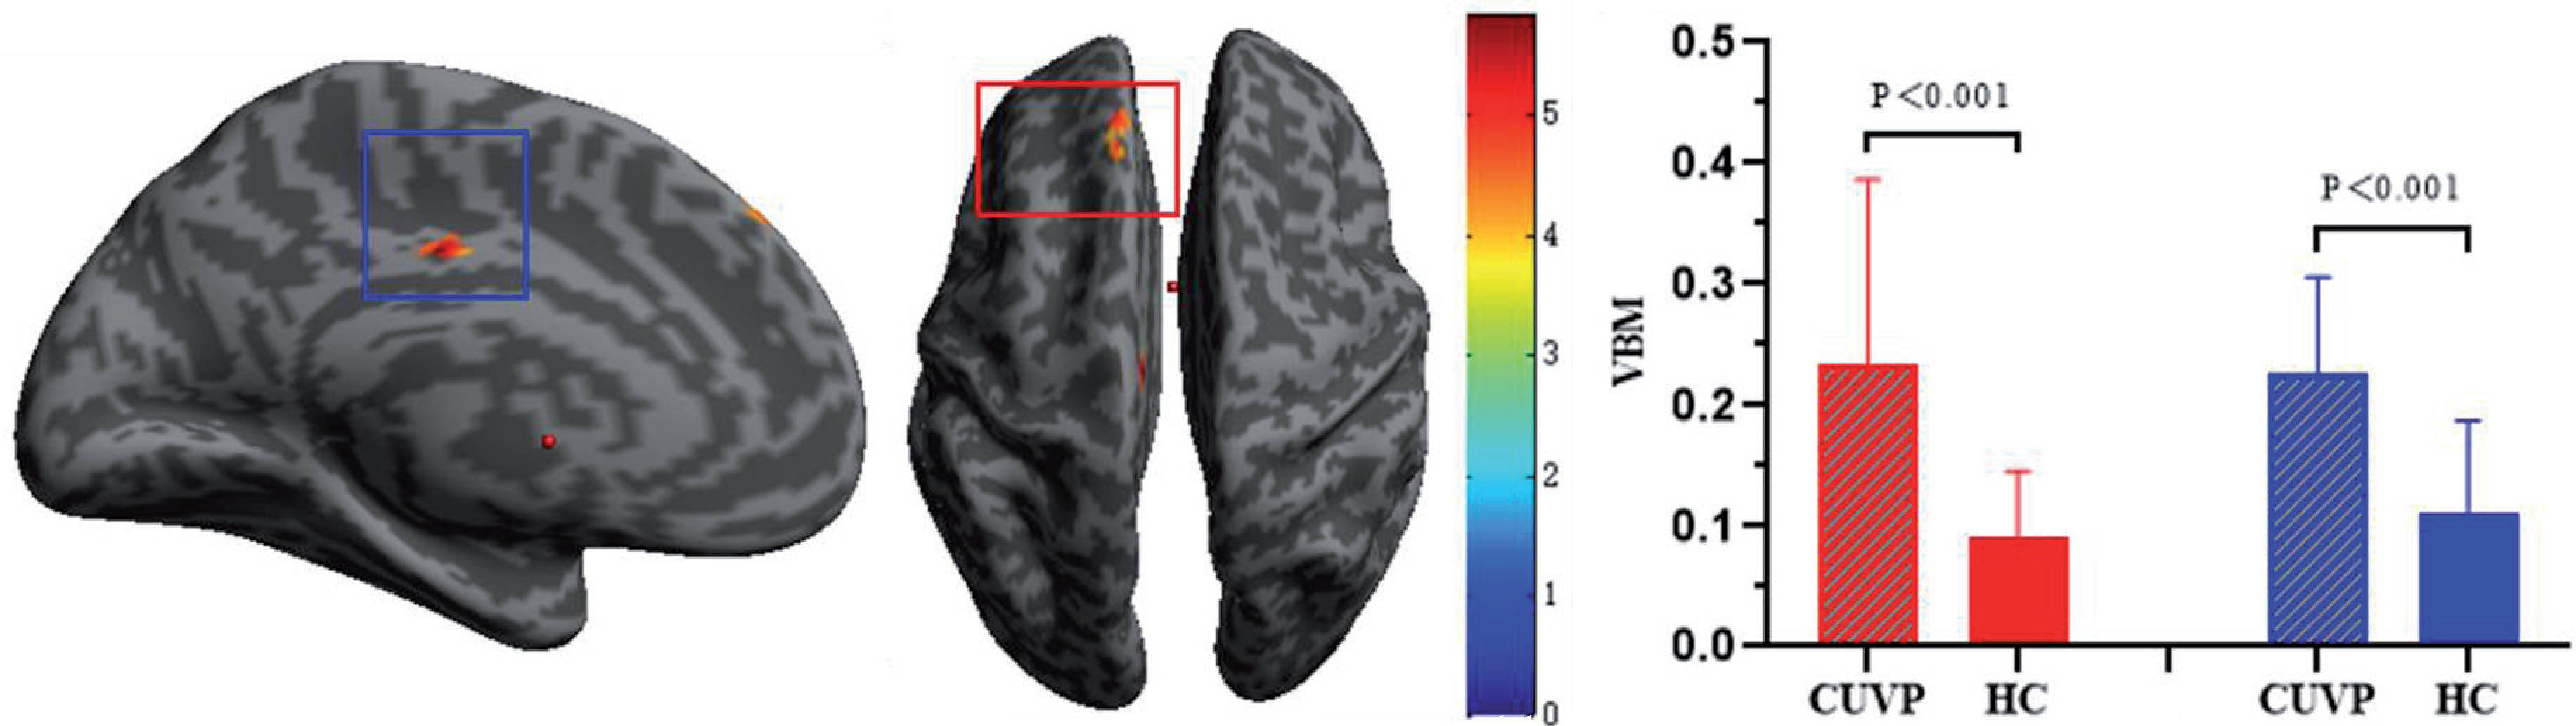 The gray matter volume in the left medial superior frontal gyrus and left middle cingulate gyrus was signifi cantly higher in patients with CUVP thant in HCs.